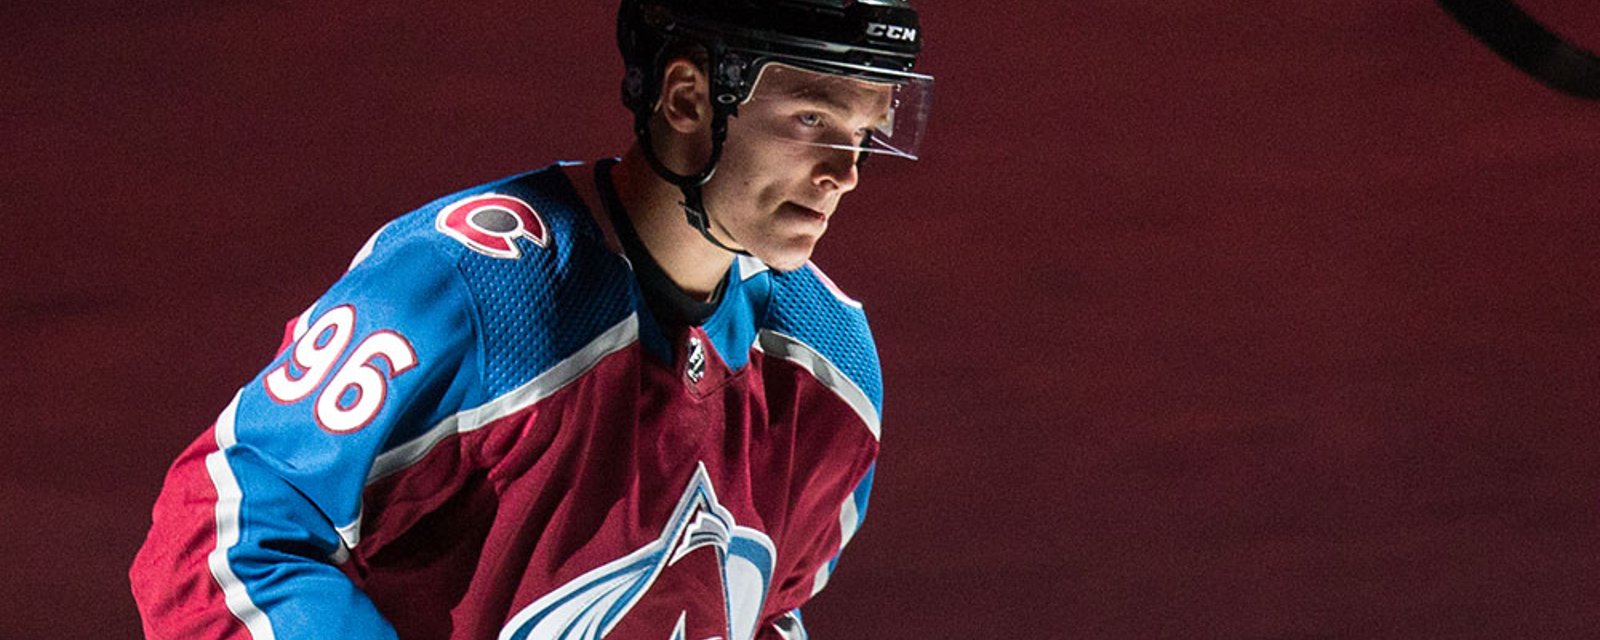 Rantanen joins Laine and officially joins Swiss team during contract negotiations